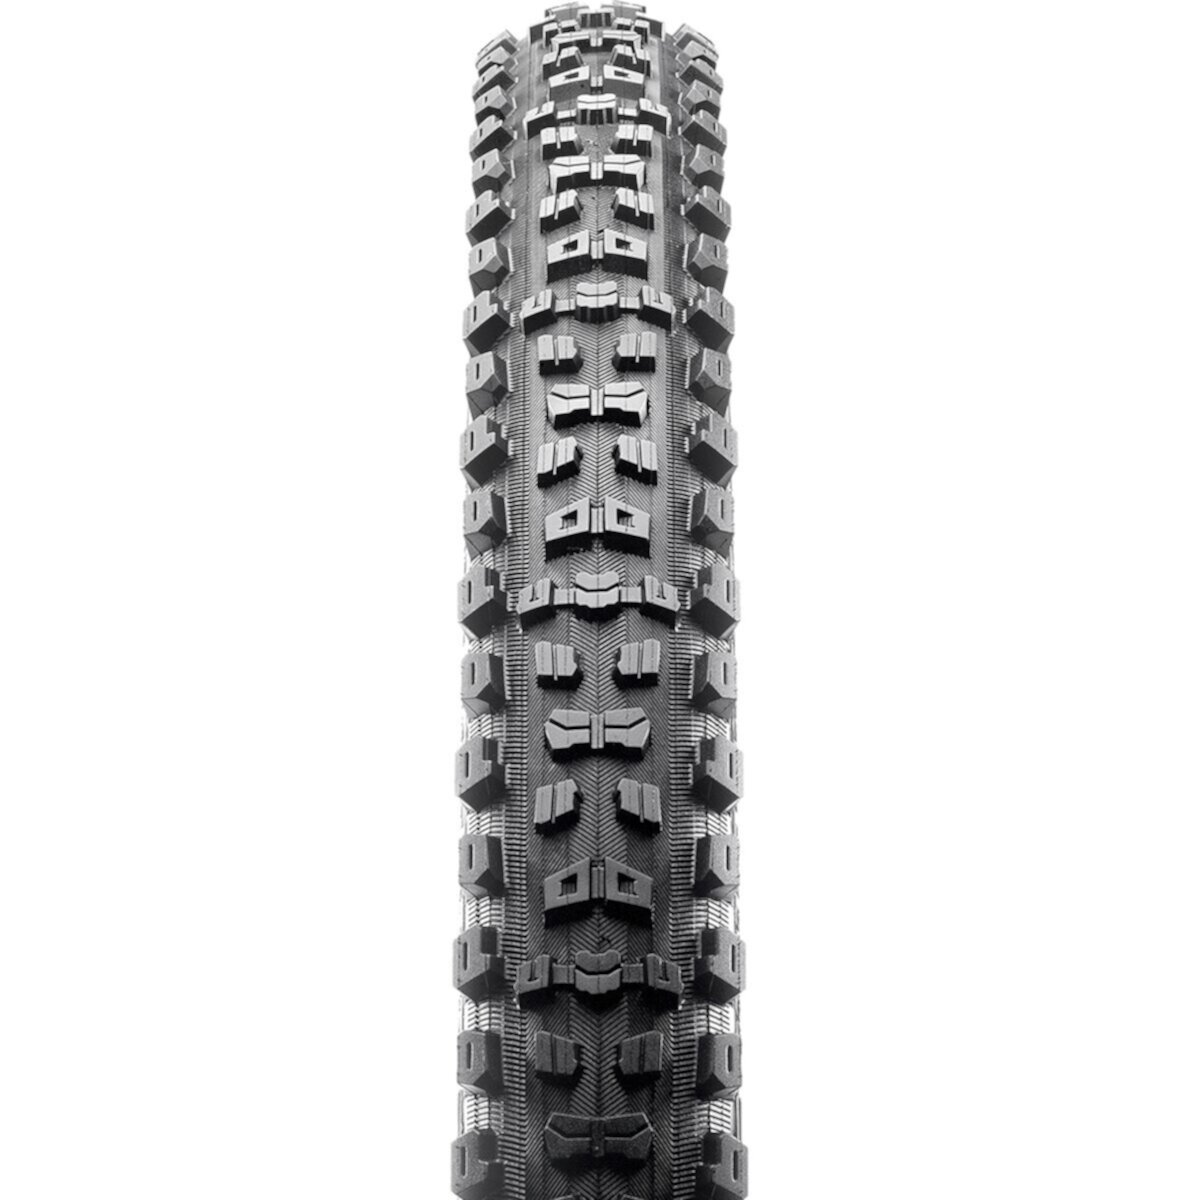 Покрышка Maxxis Aggressor Double Down / TR - 29 дюймов Maxxis